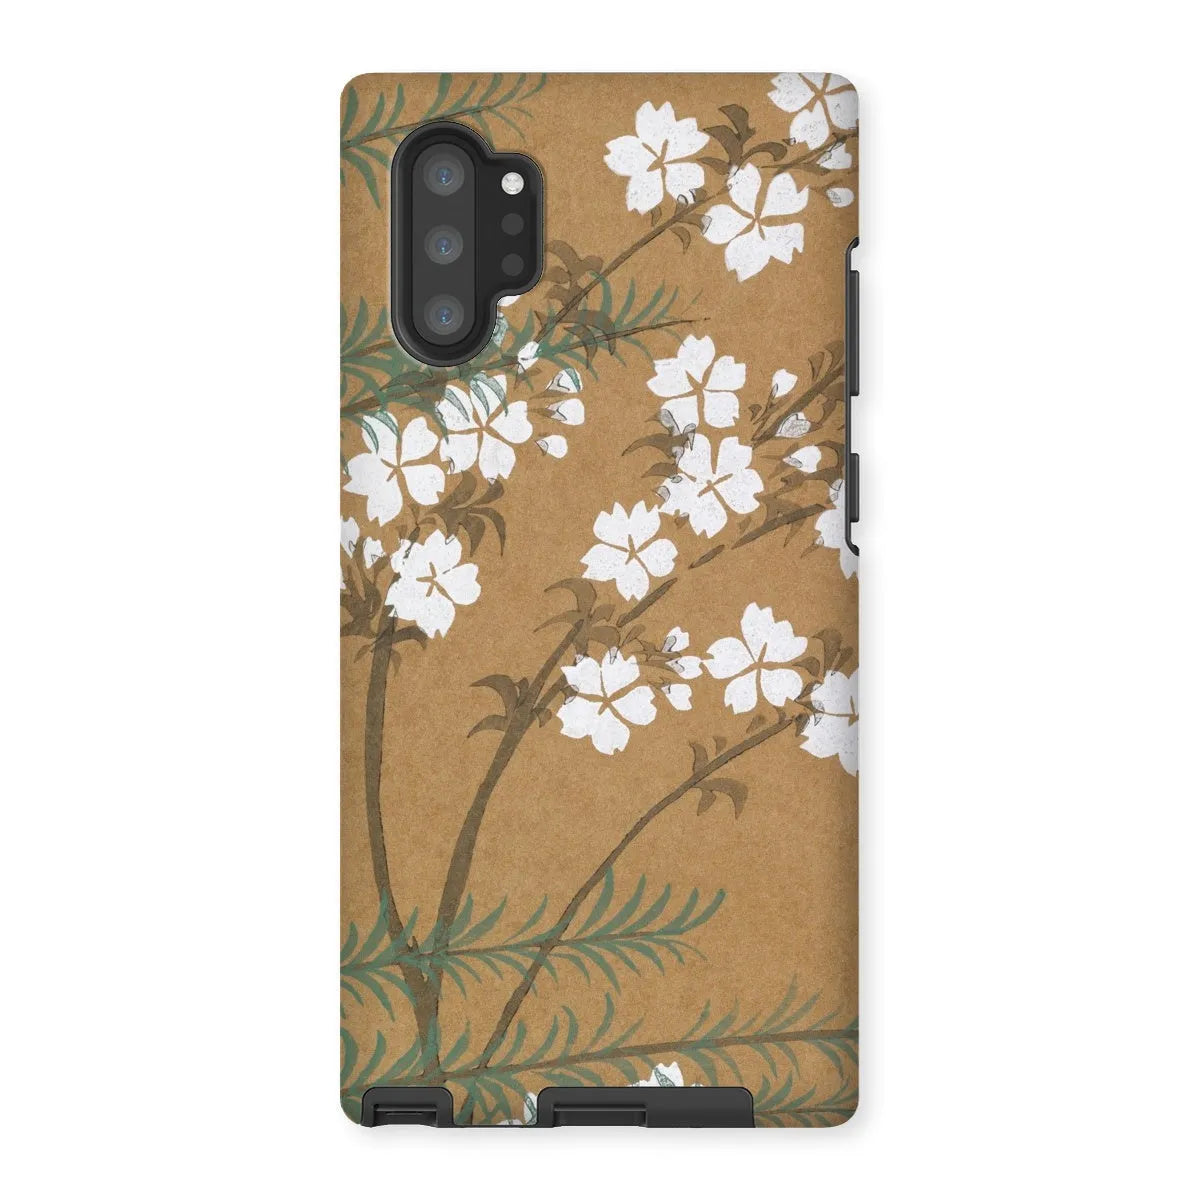 Blossoms From Momoyogusa Floral Phone Case - Kamisaka Sekka - Samsung Galaxy Note 10p / Matte - Mobile Phone Cases